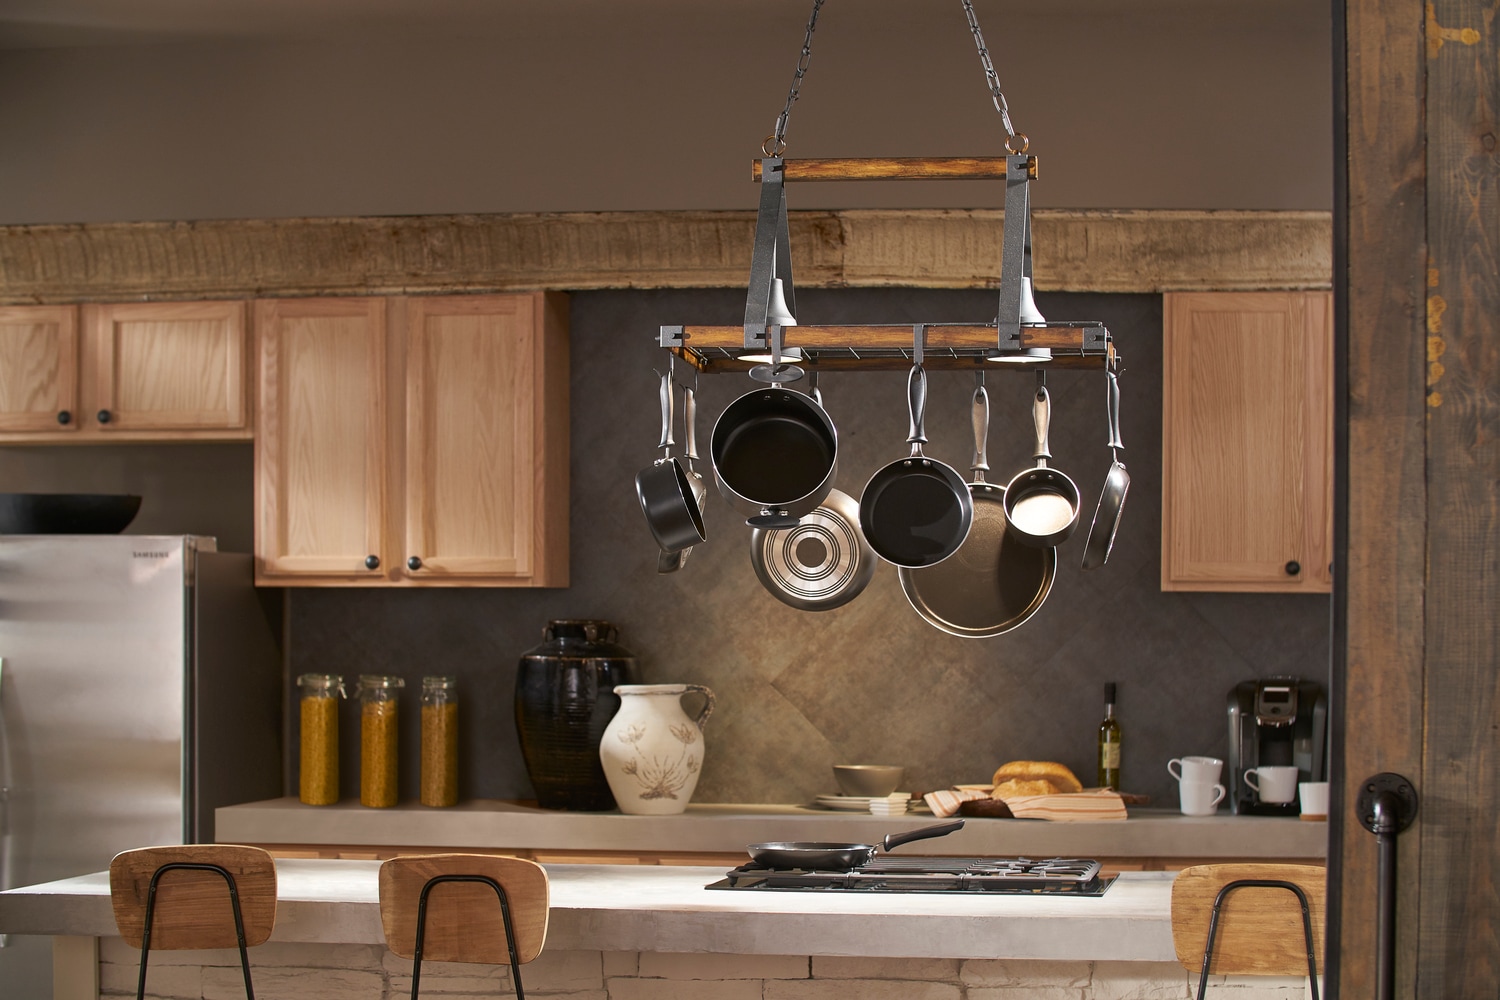 New 2022 Wholesale Black Pot Holders Kitchen Rack For Hanging Pots And Pans  - Buy New 2022 Wholesale Black Pot Holders Kitchen Rack For Hanging Pots  And Pans Product on